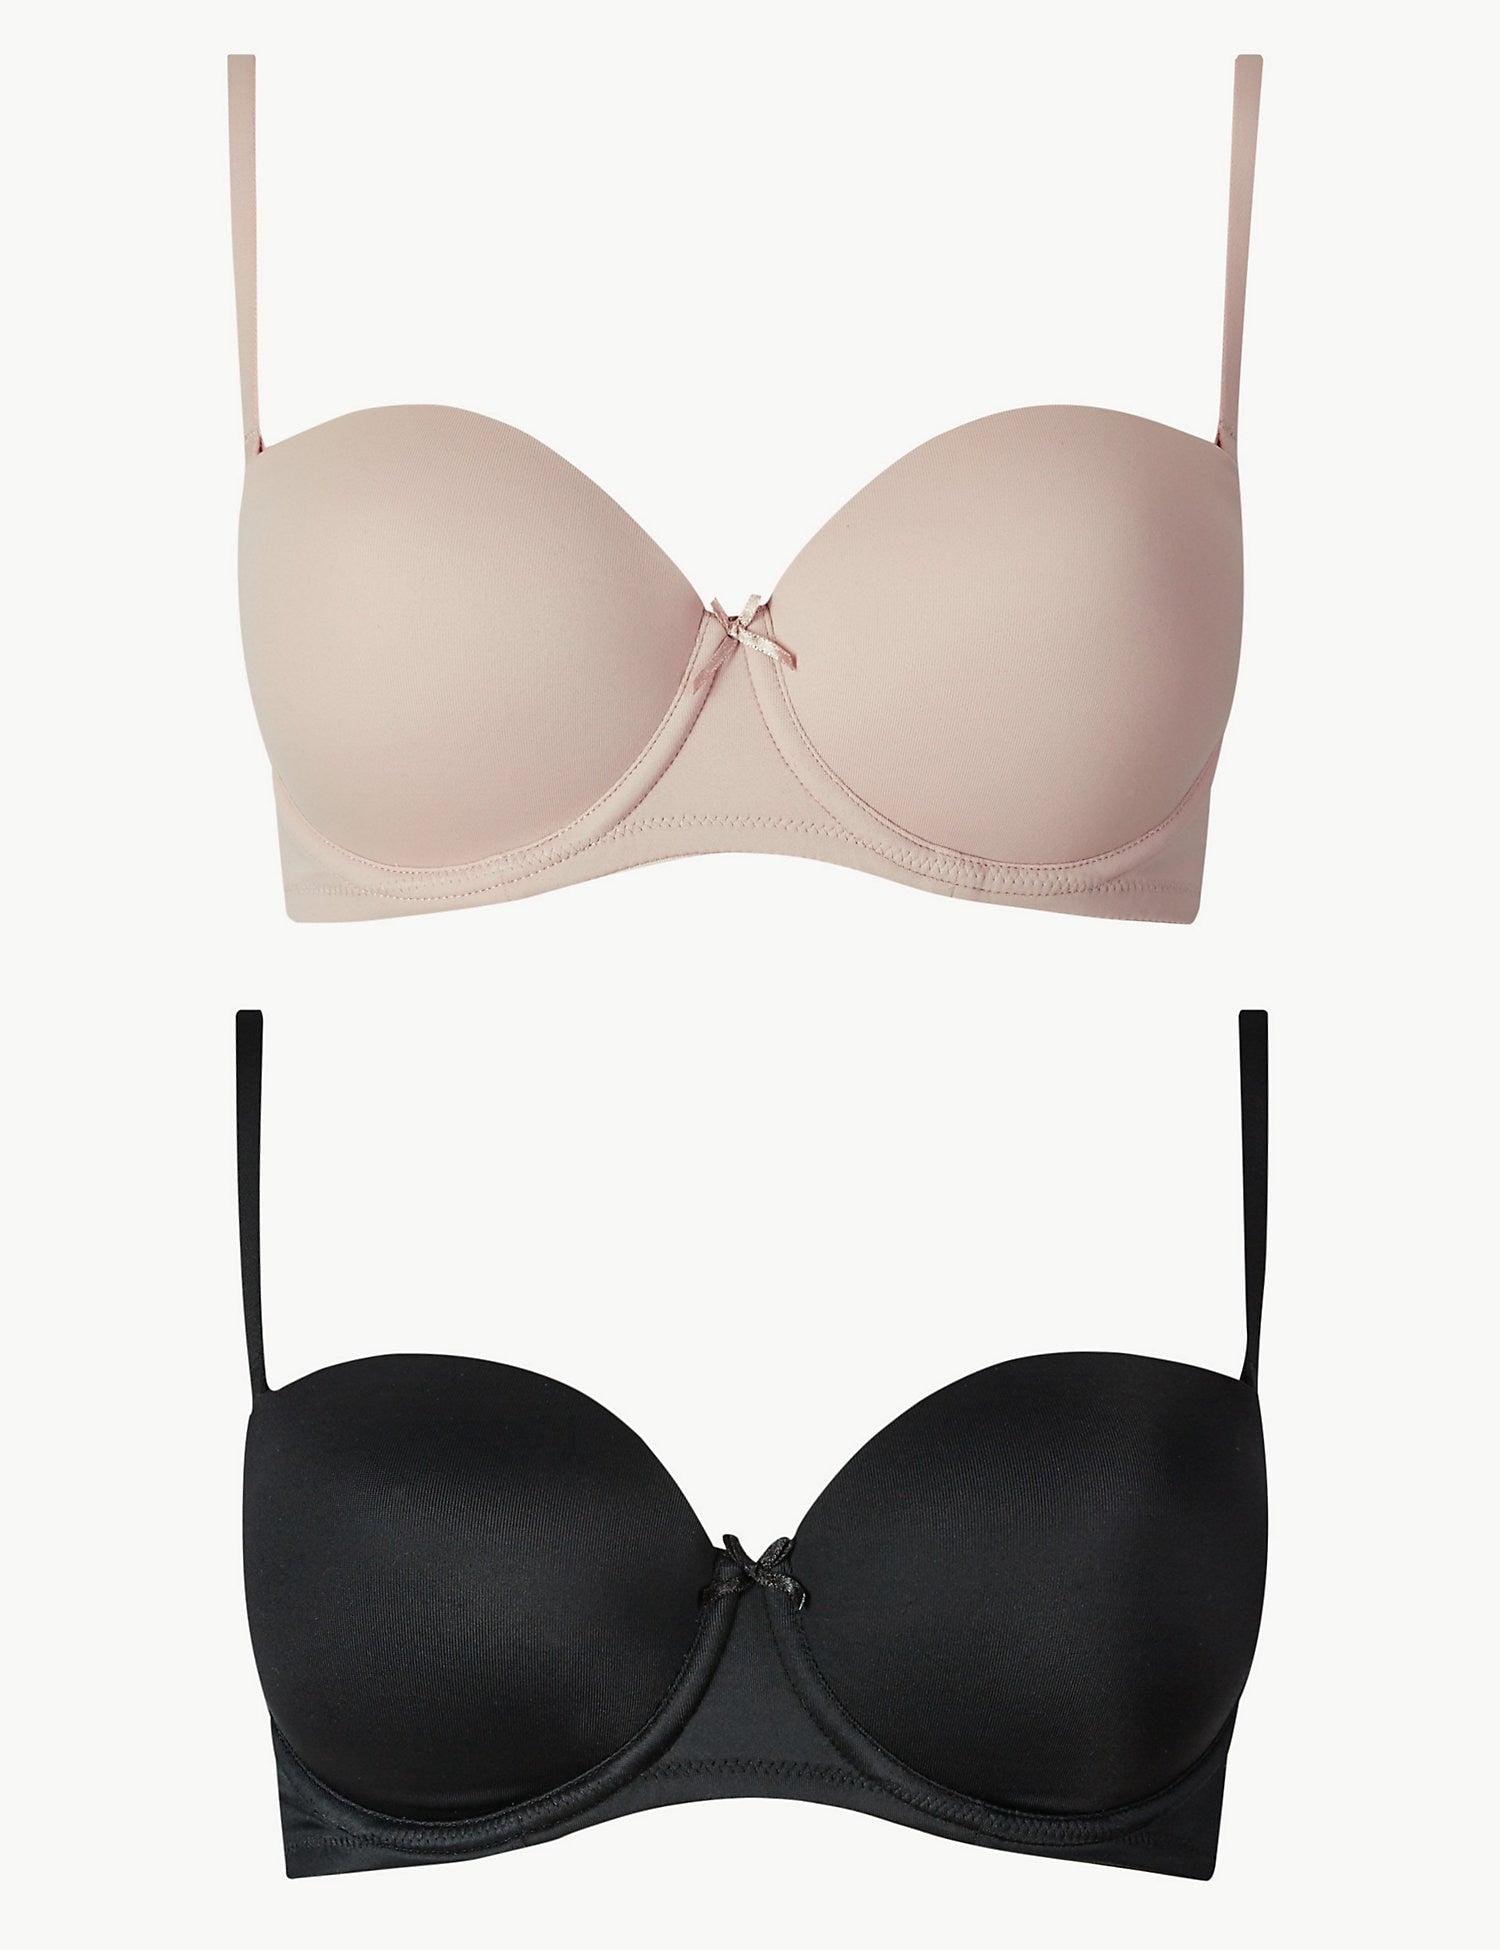 Buy Cotton Rich Bandeau Bras 2 Pack from the Next UK online shop